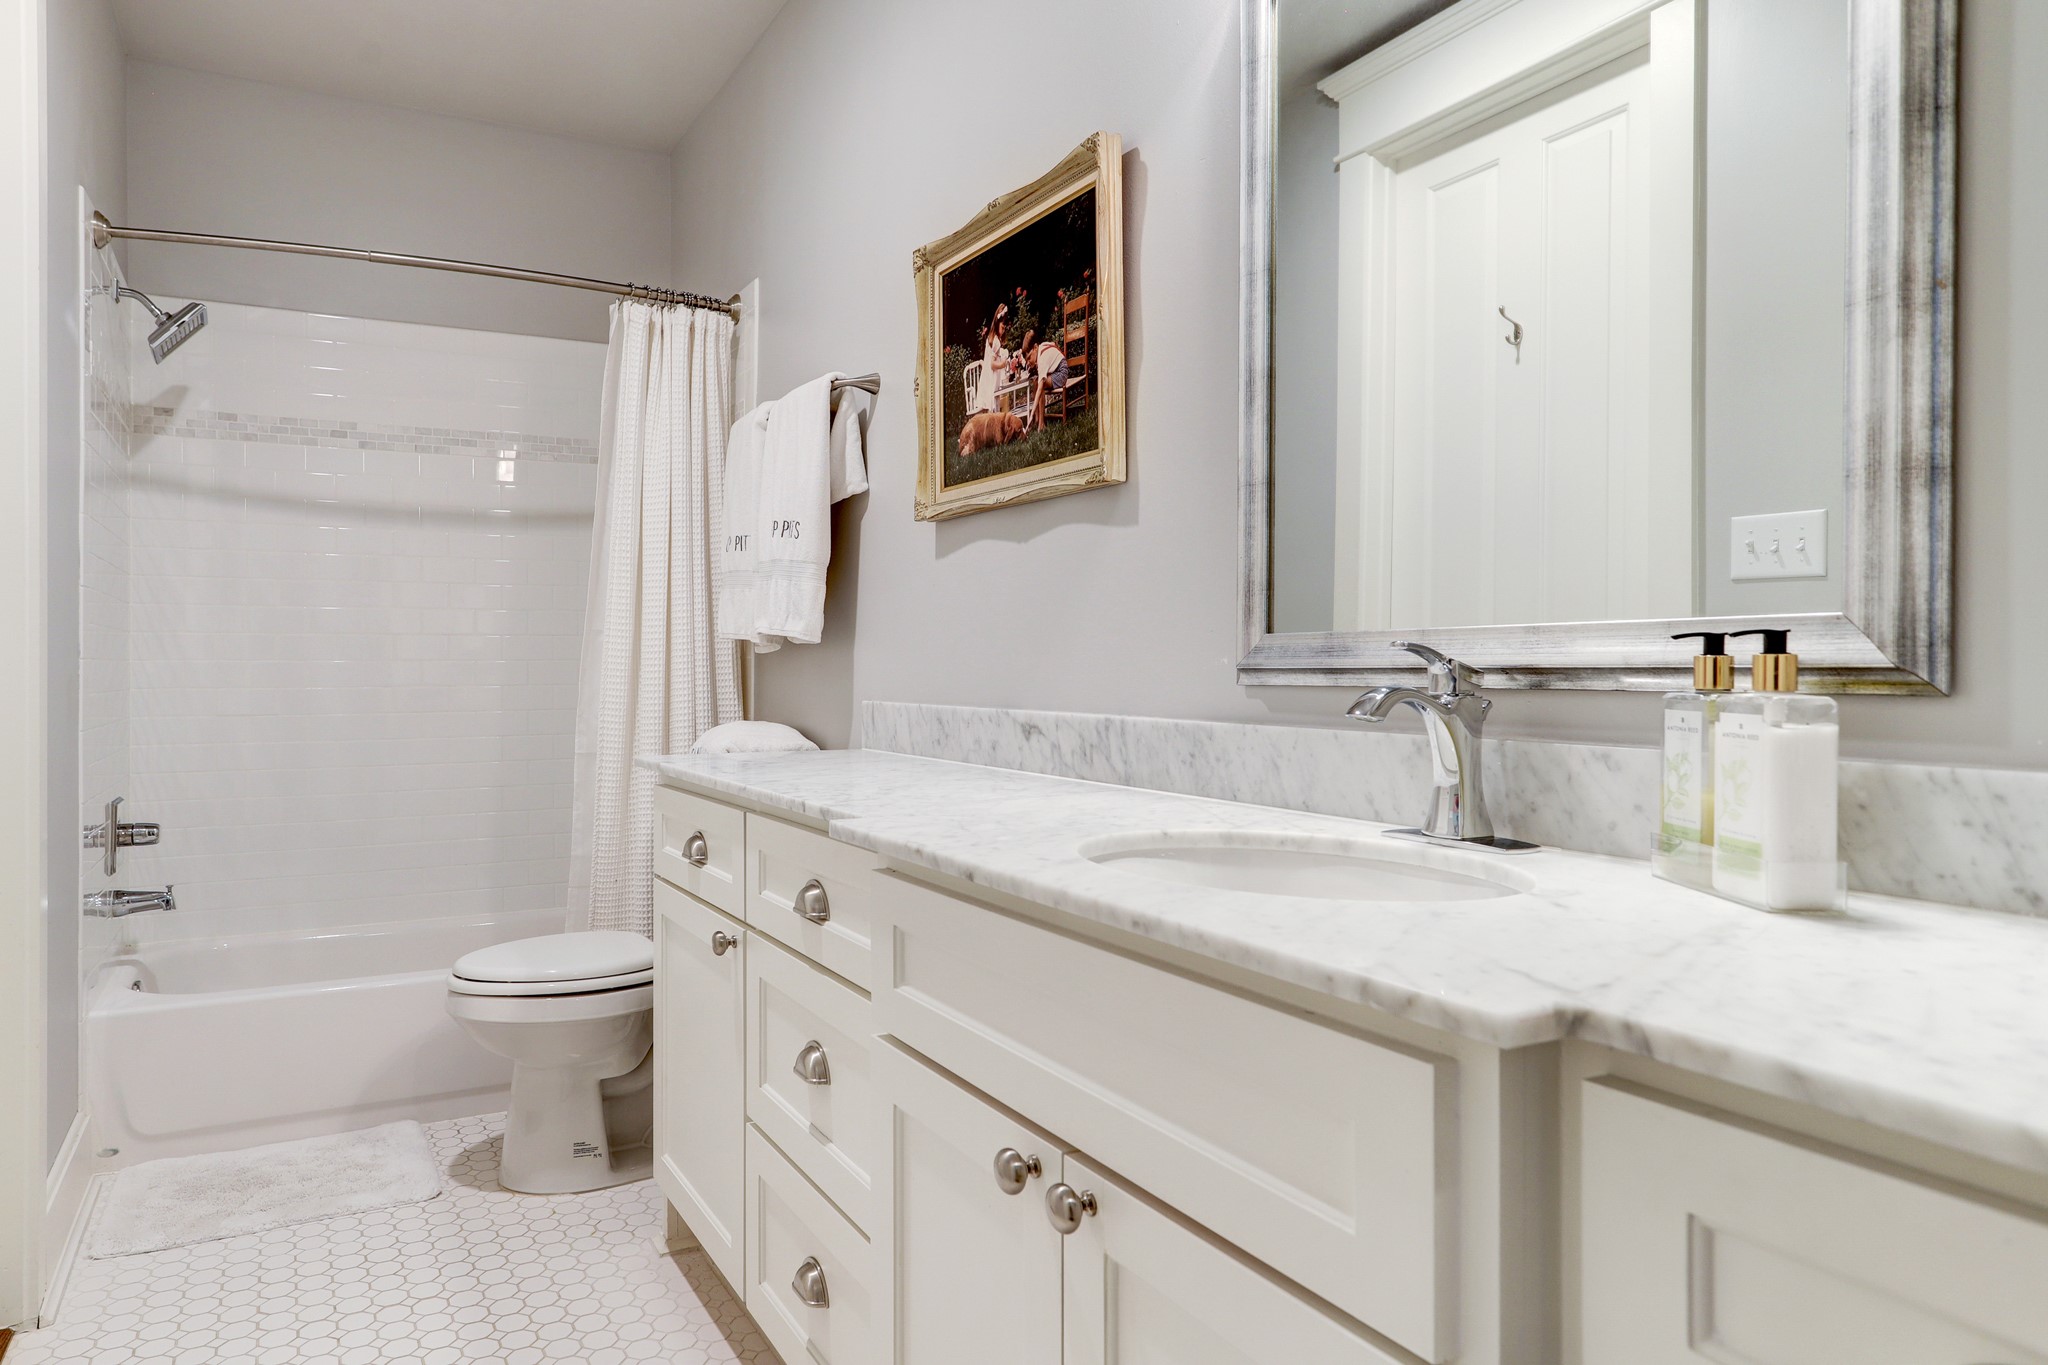 This secondary bathroom features marble counter tops, a shower-bathtub, tile flooring, and hallway access for guests.